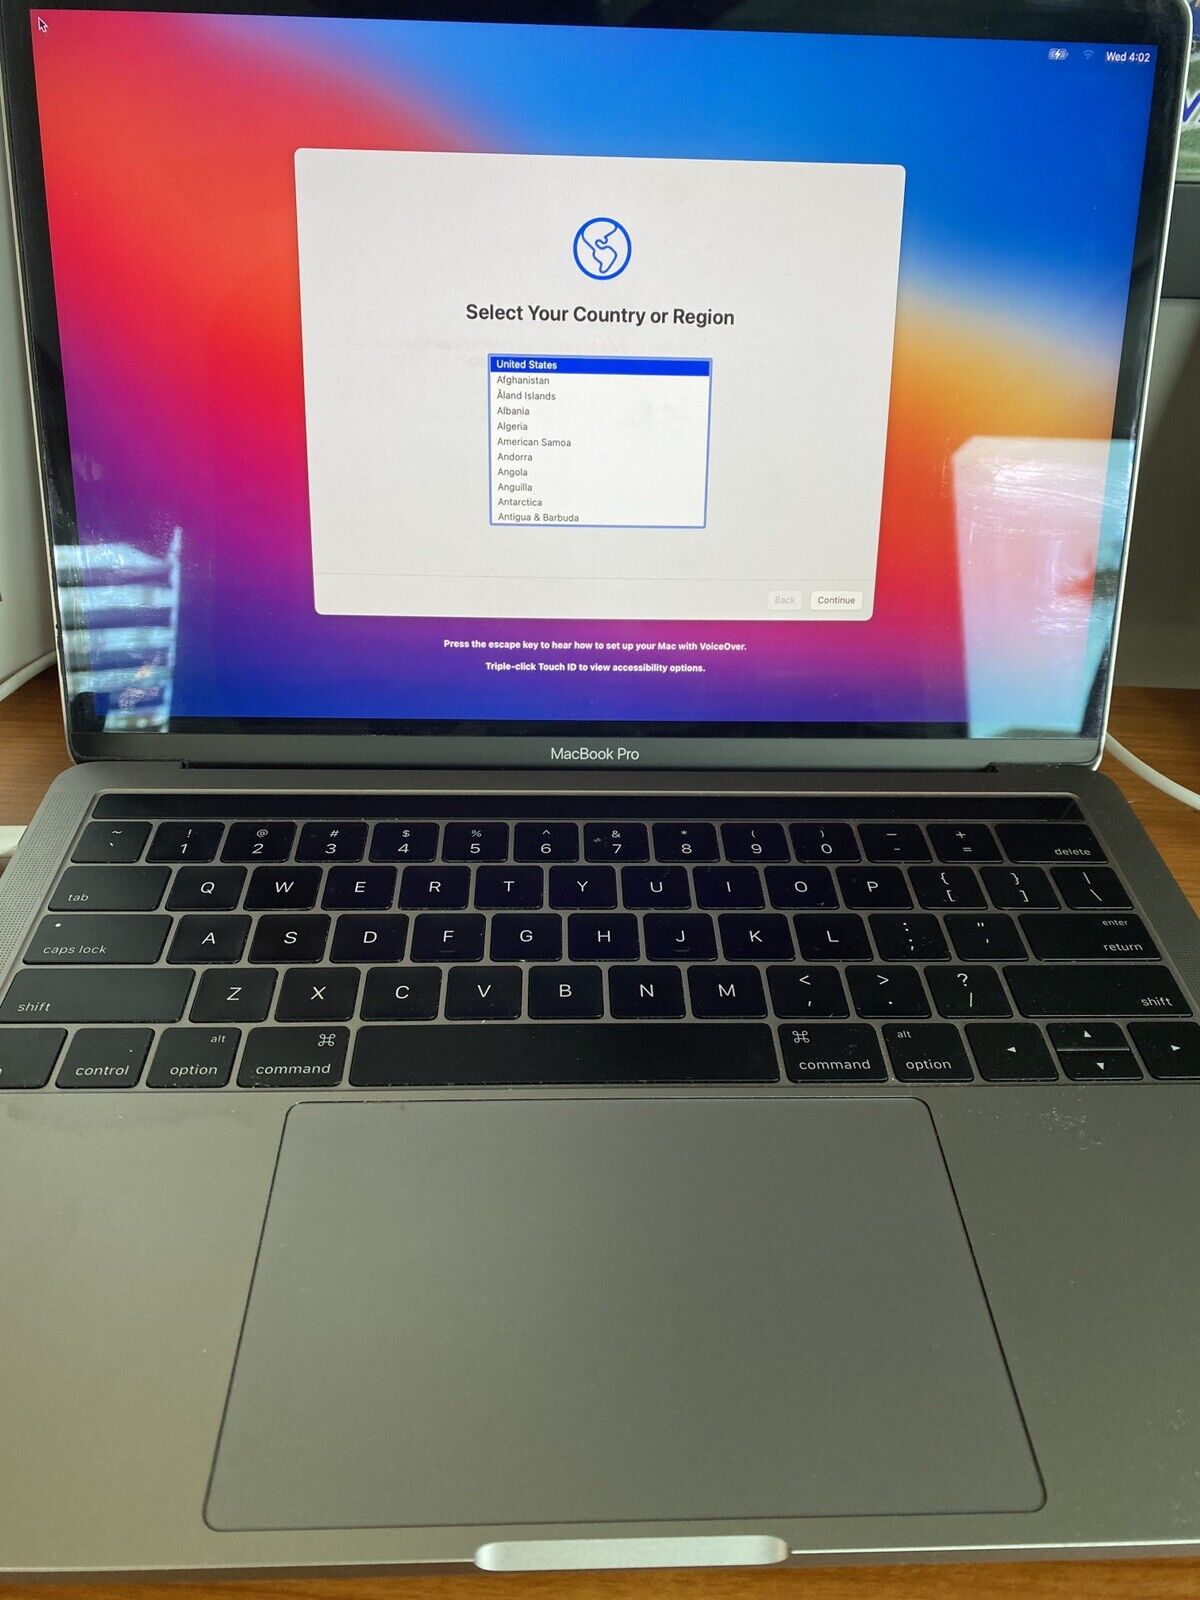 Macbook Pro 13 inch 2016 3.3Ghz 16GB Memory and 500GB Hard Drive